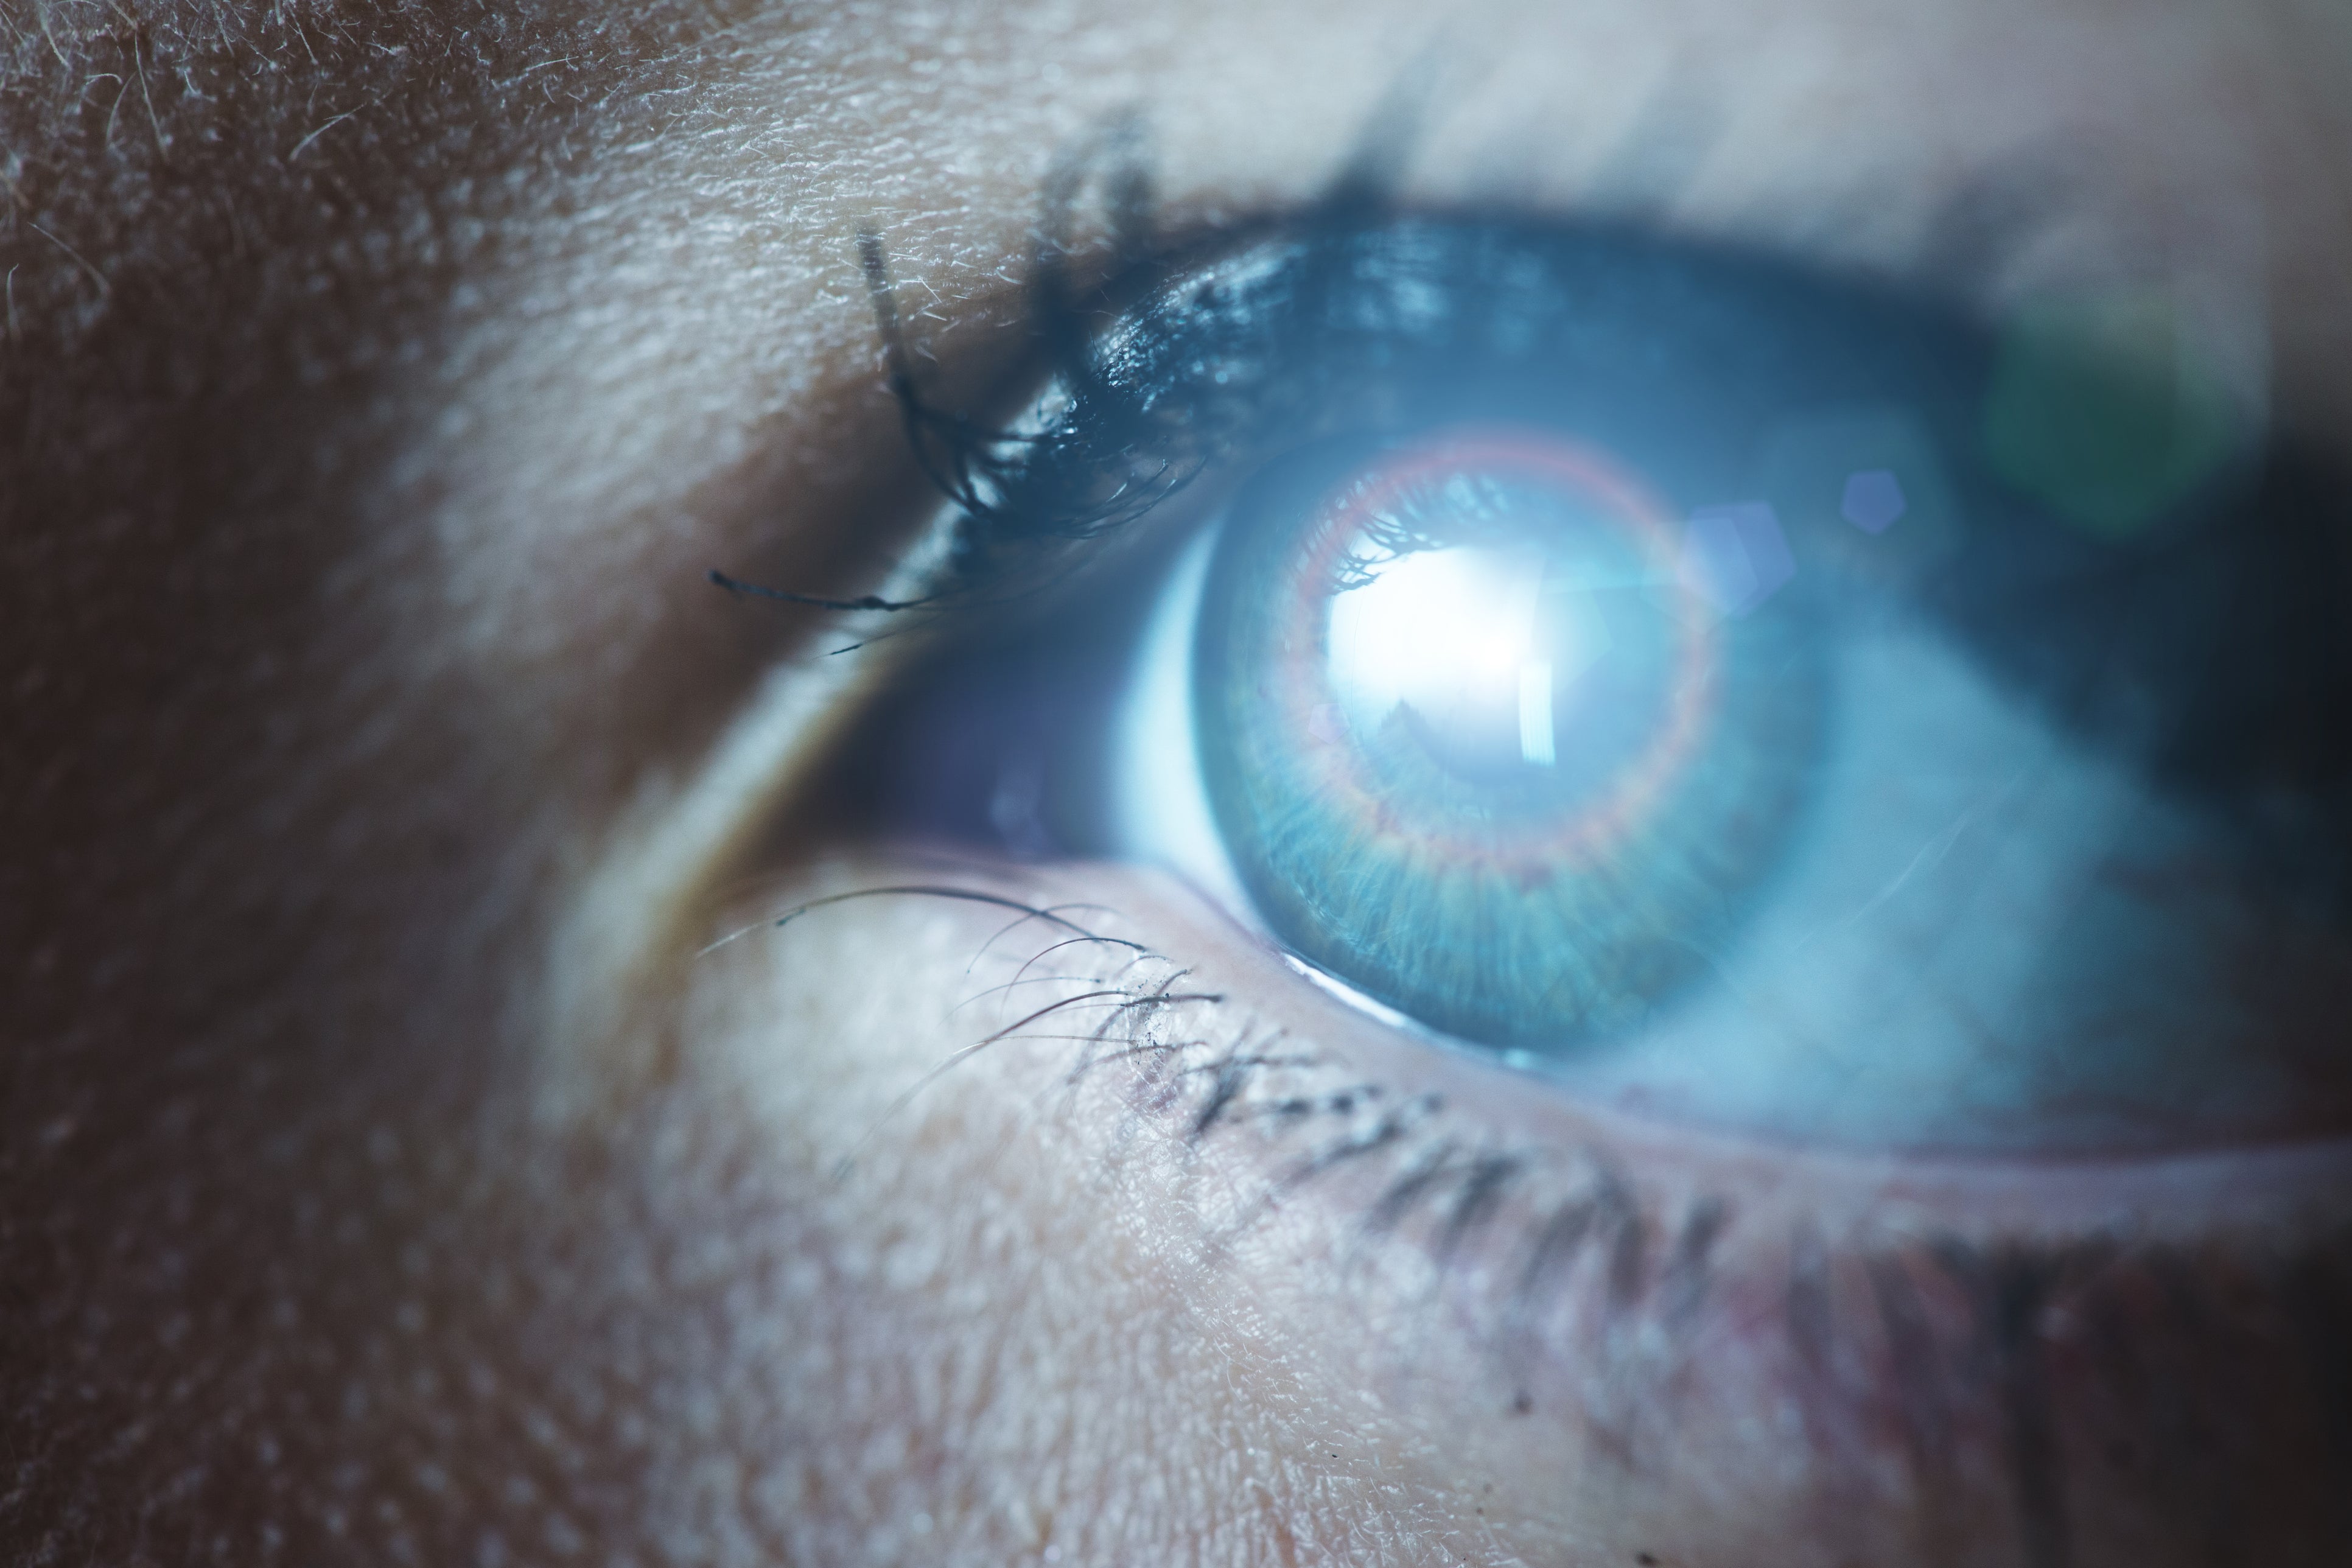 Experimental visual prostheses could help restore sight in some people